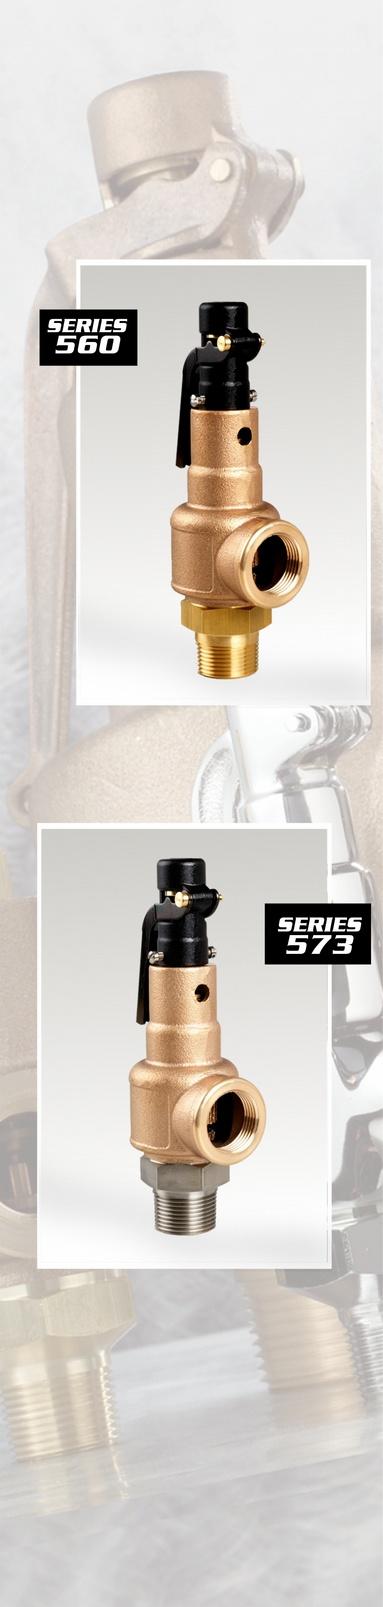 Series 560/570 Safety Valves Our 560 / 570 valve line is a high capacity safety valve used for boilers, piping lines and vessel protection. Designed and engineered for heavy-duty industrial use.